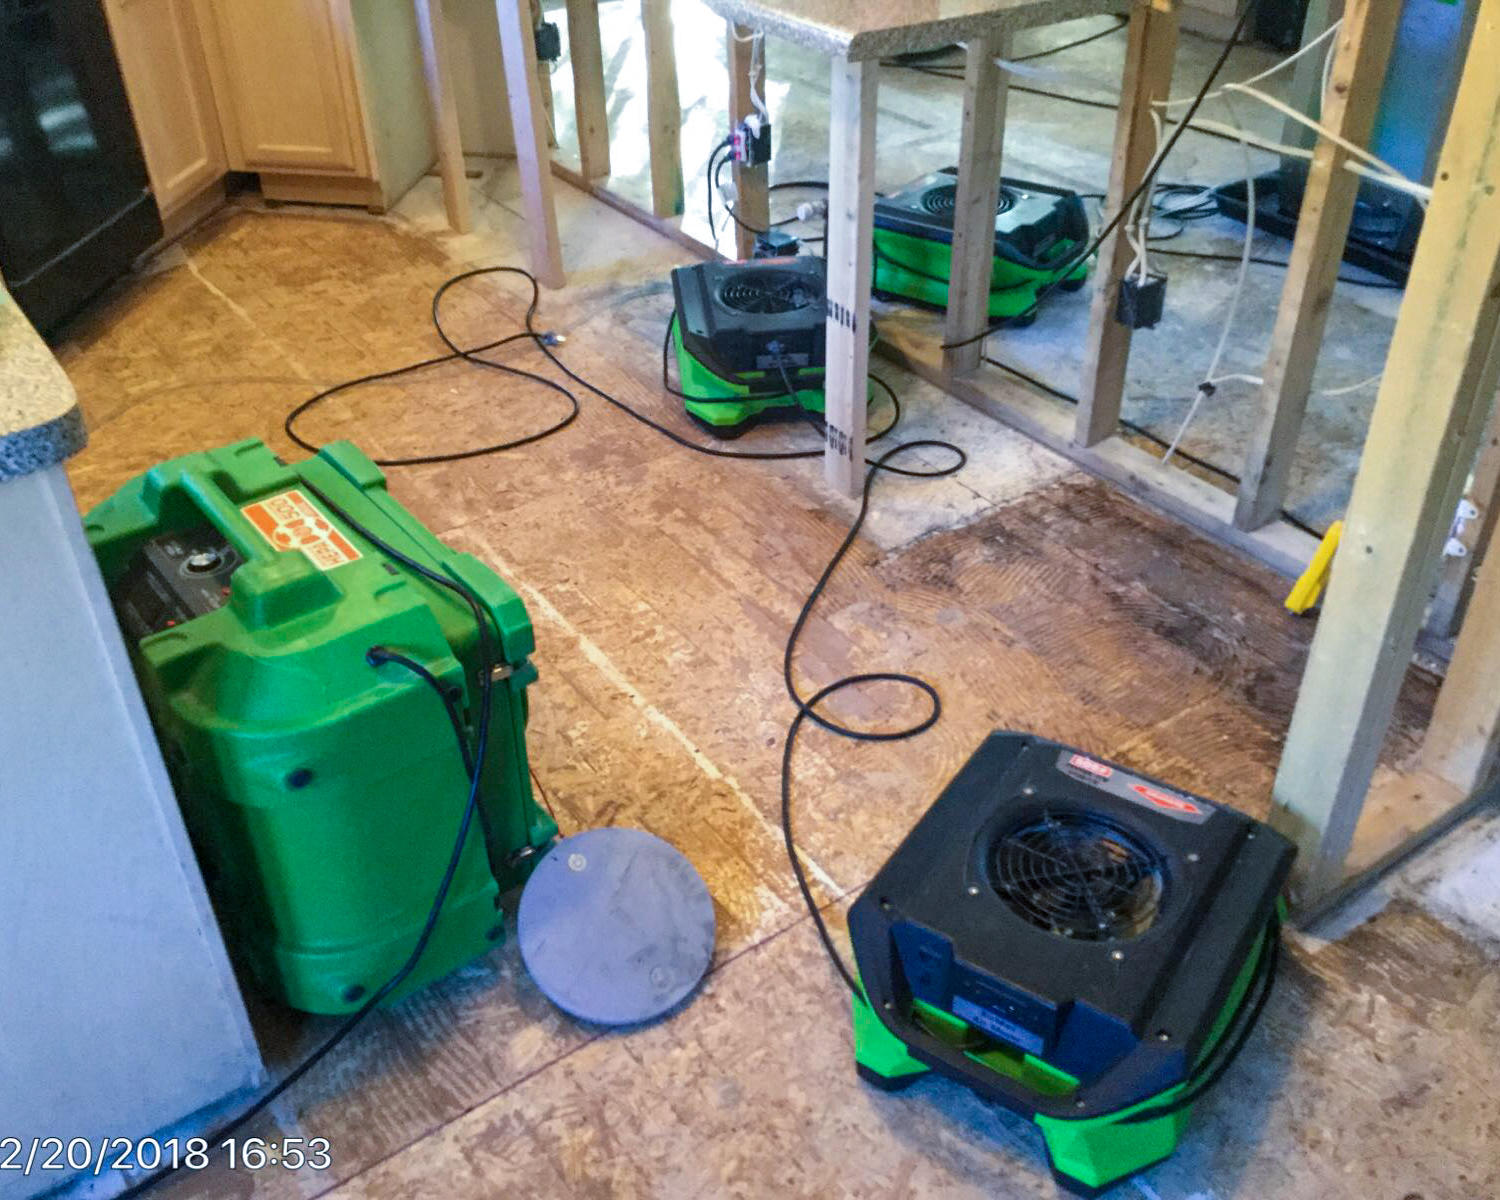 SERVPRO of Yavapai County has the best equipment to properly restore your home to preloss conditions.